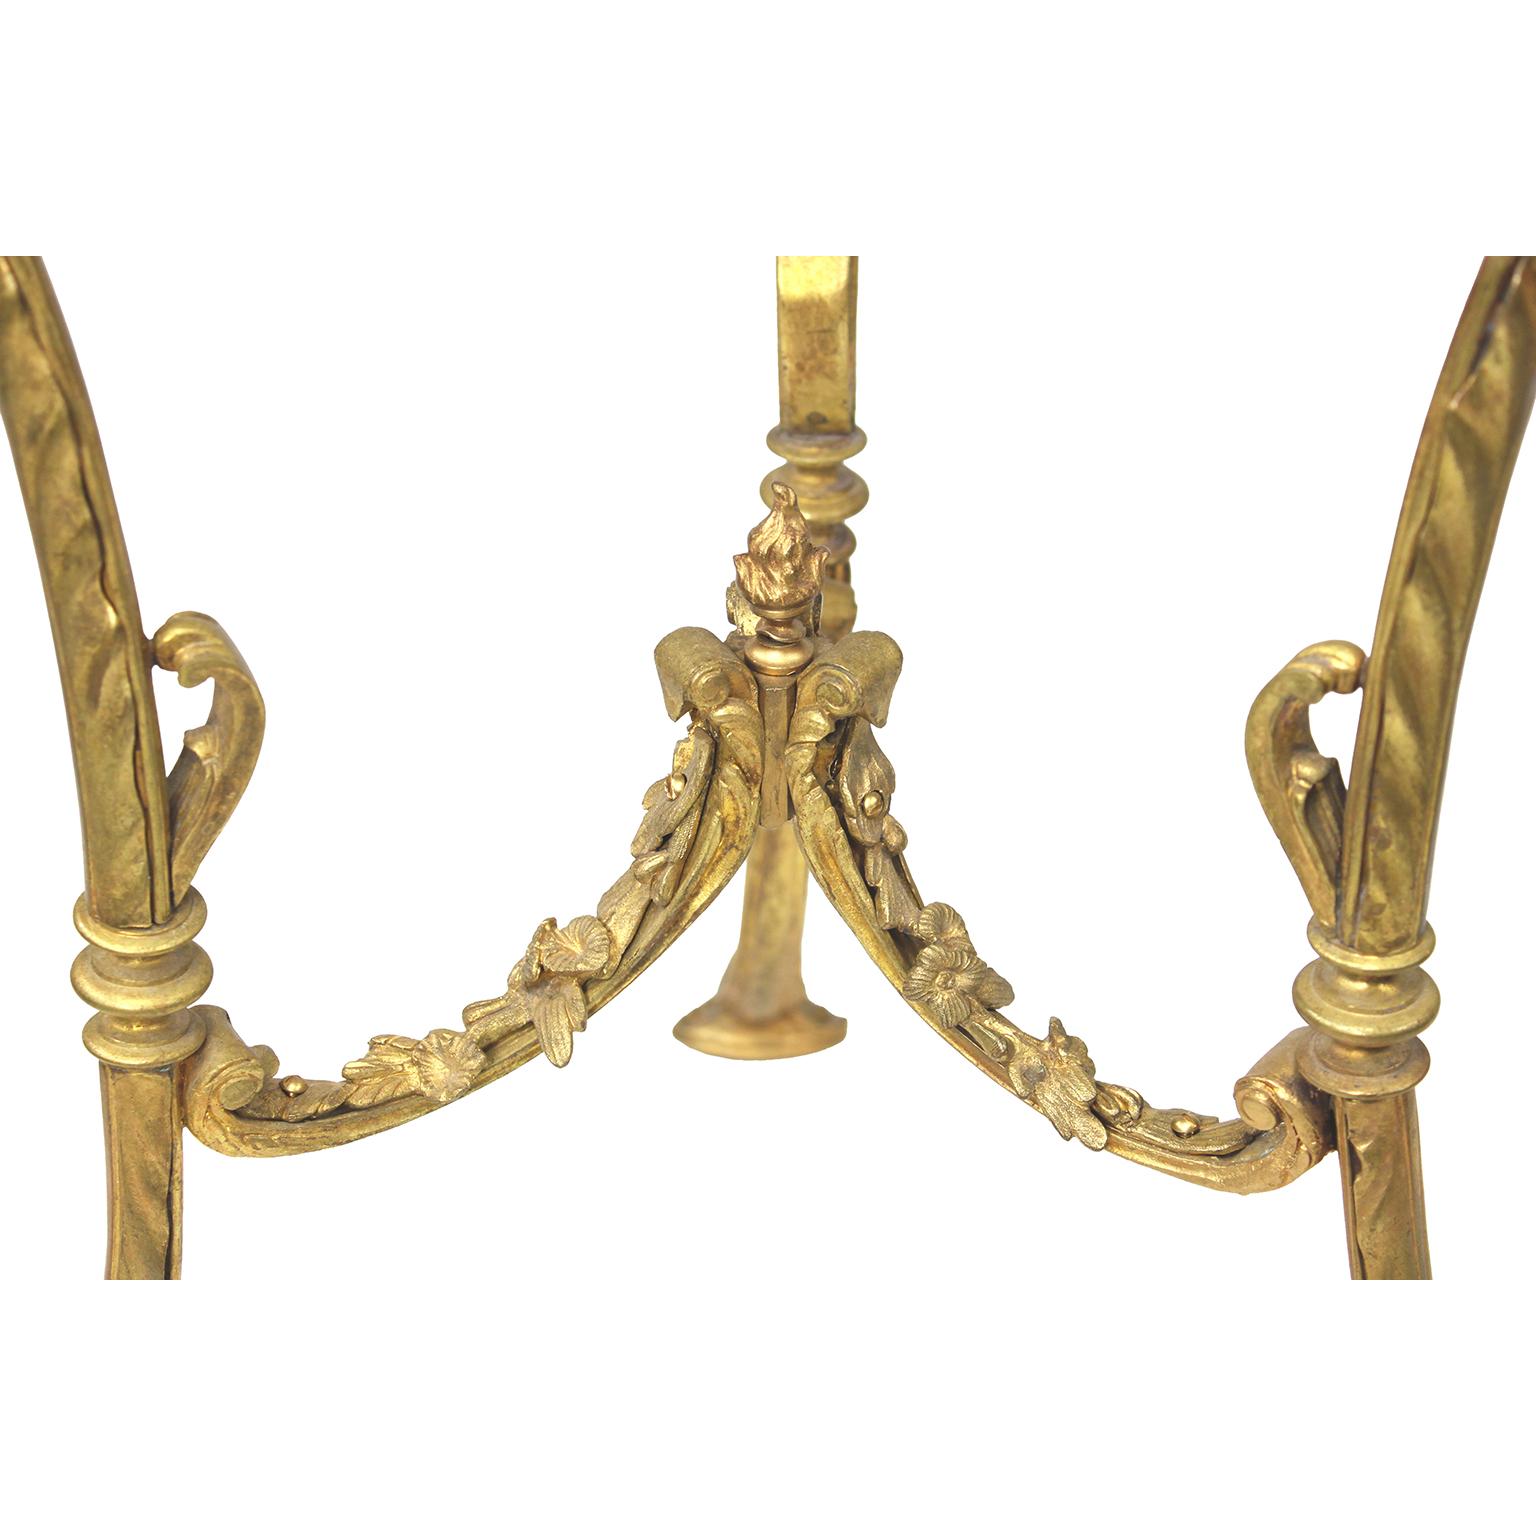 A French Belle Époque Louis XV Style Gilt-Bronze Gueridon Table with Marble Top For Sale 6